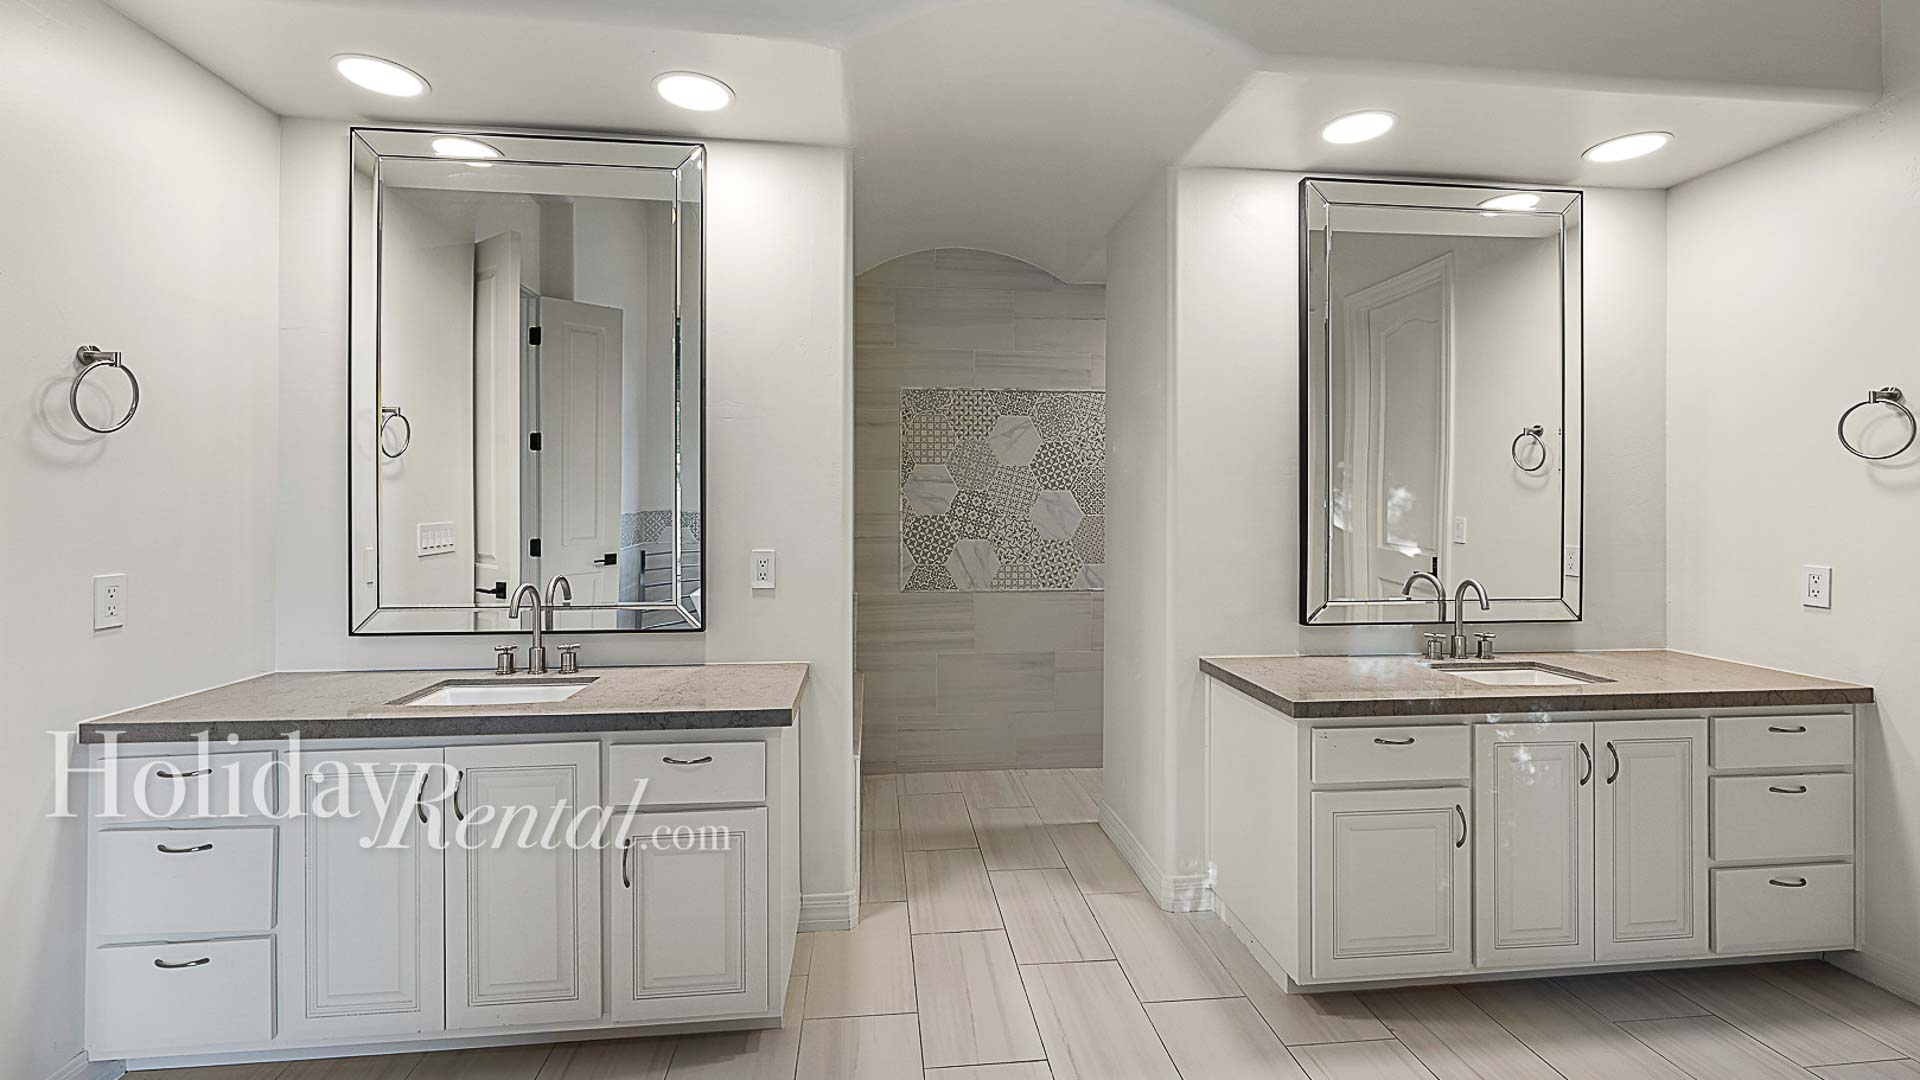 Primary Bath - Spacious bathroom with double vanity, large tub, and walk in shower.